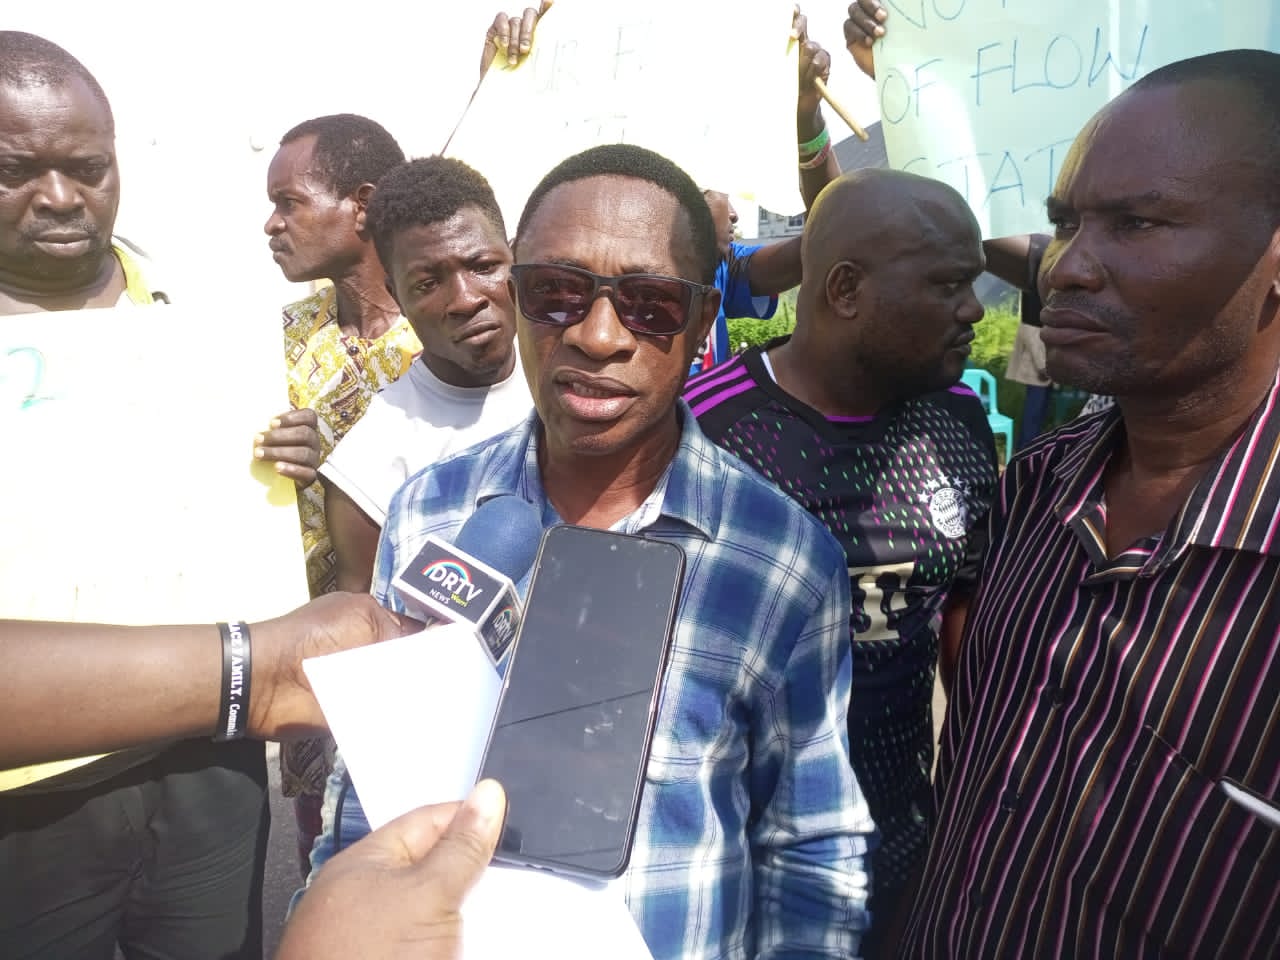 The President General of Ogbe-Udu community, Mr. Joseph Eni speaking to newsmen during the protest in Ogbe-Udu community.